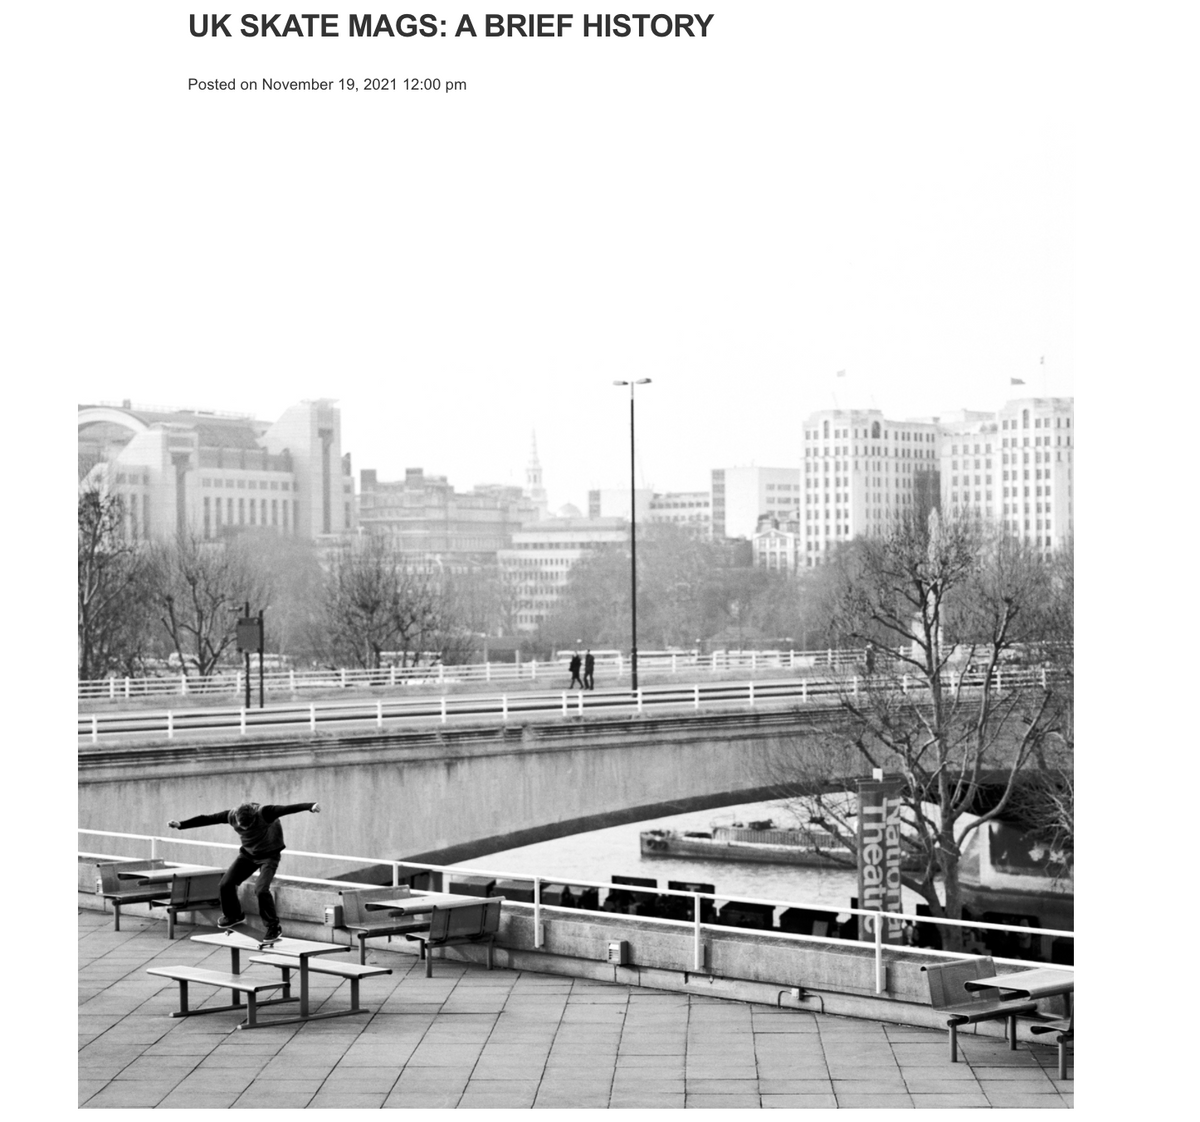 A History of UK Skate Mags